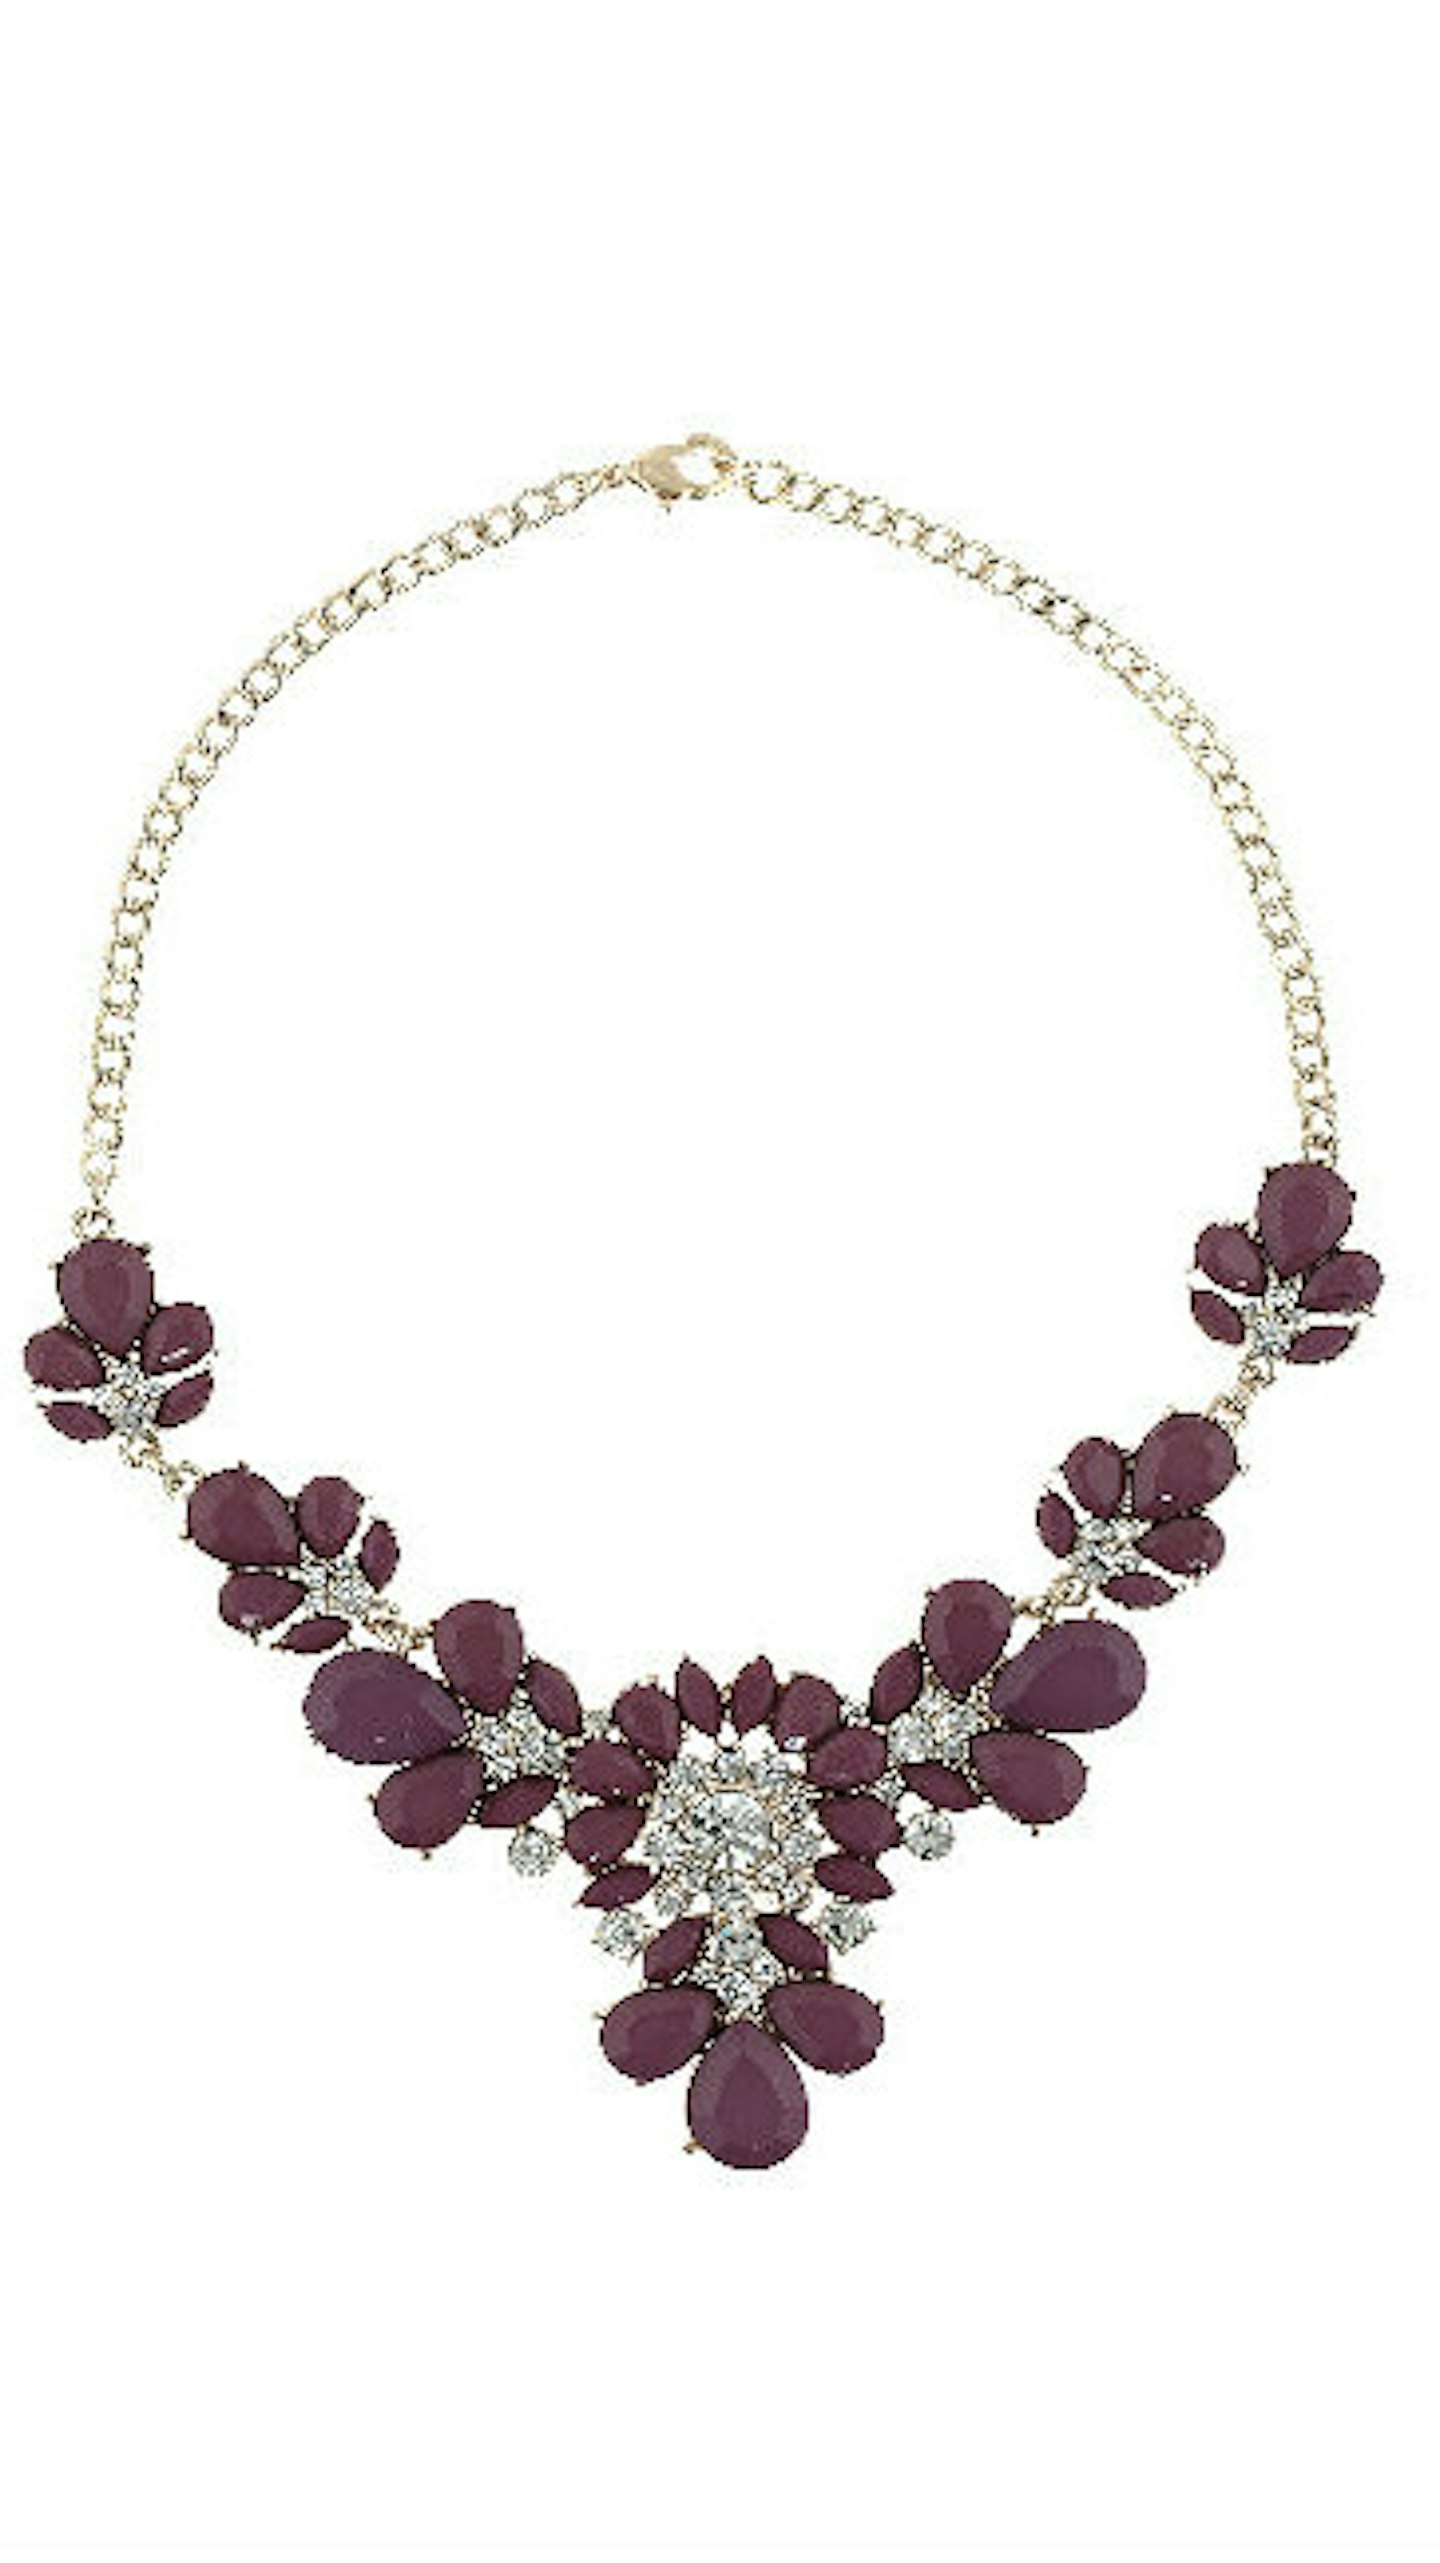 Necklace : £20